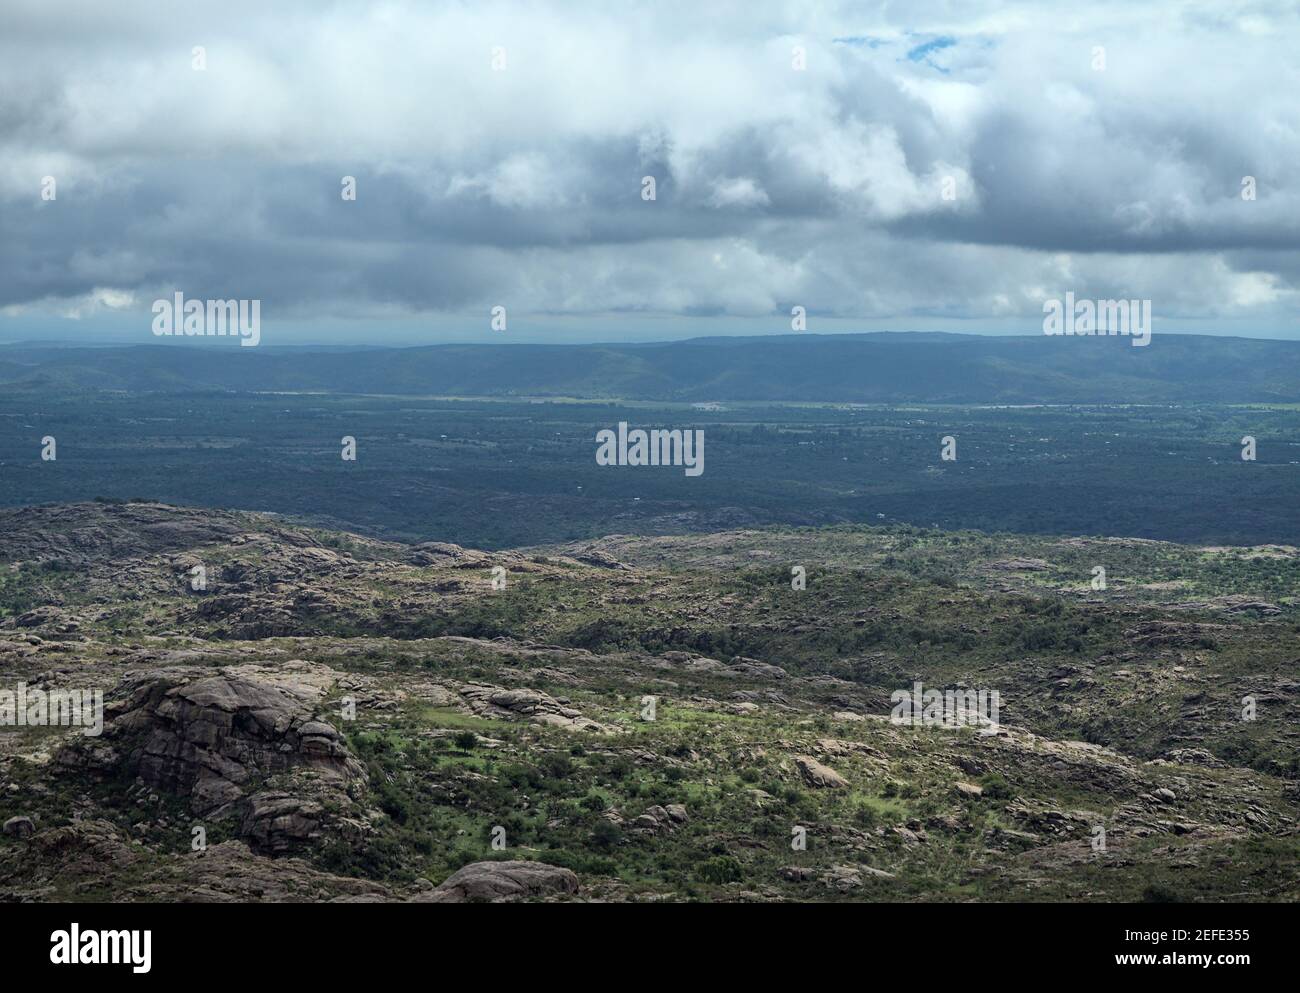 View of the landscape at Altas Cumbres (High Hills) in Cordoba province, Argentina. Stock Photo